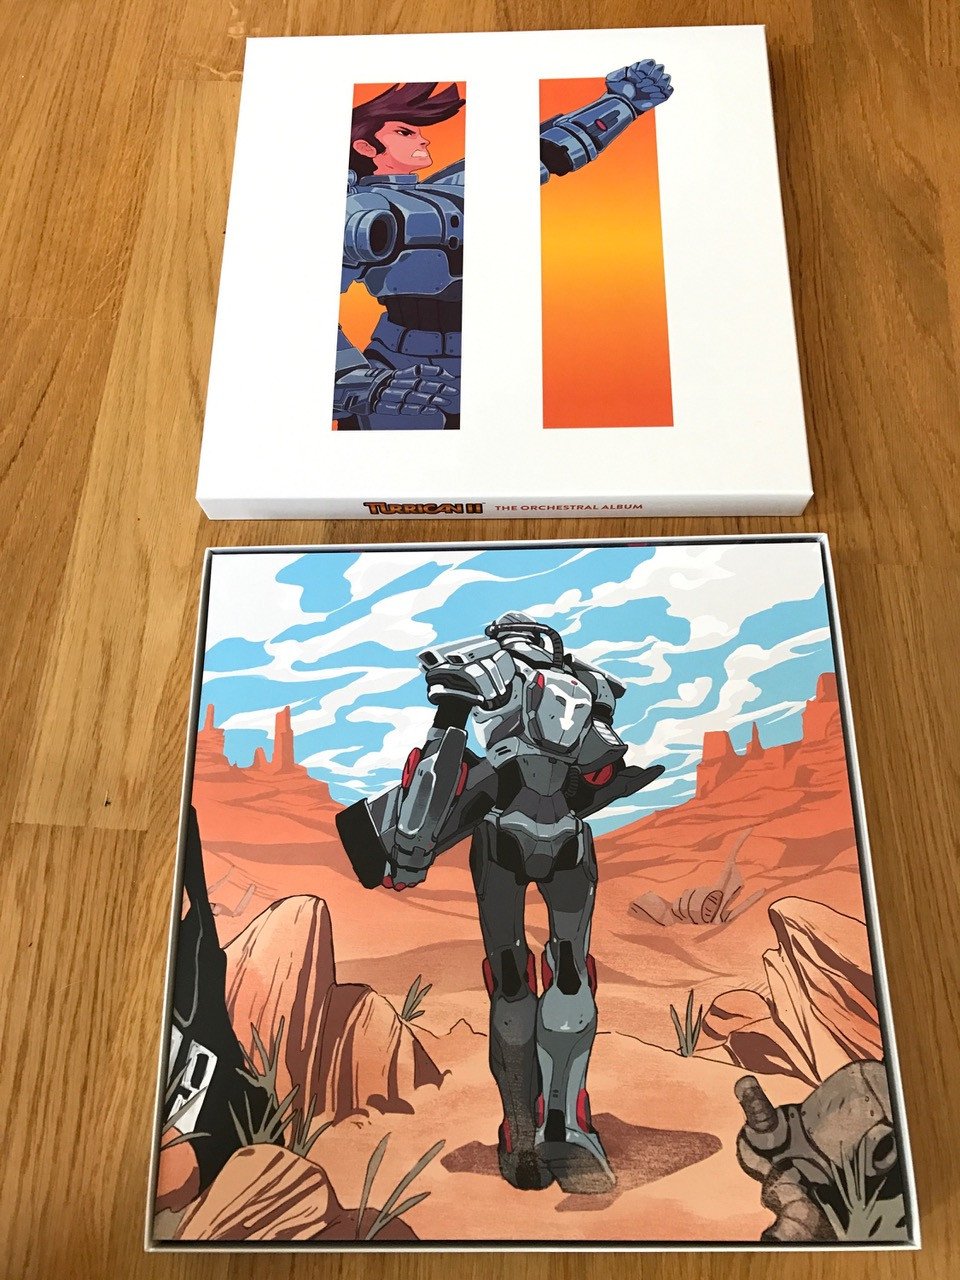 Turrican II - The Orchestral Album (Deluxe Limited Edition Double Vinyl + CD Box Set with additional high quality art prints  & digital downloads)